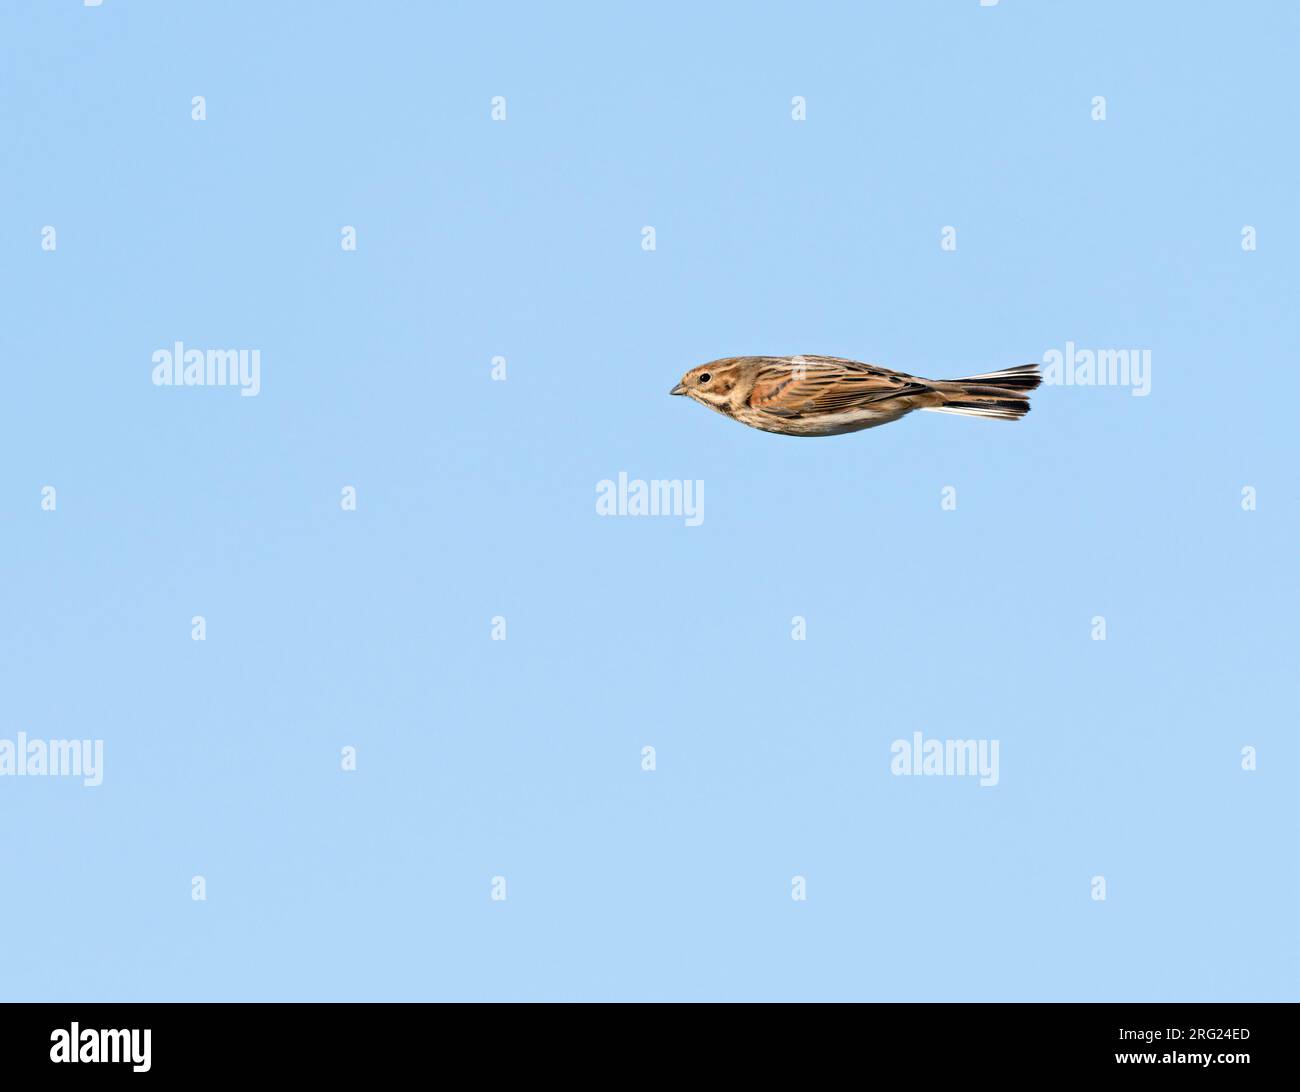 Common Reed Bunting (Emberiza schoeniclus) flying, migrating in blue sky in sideview and showing upperparts Stock Photo